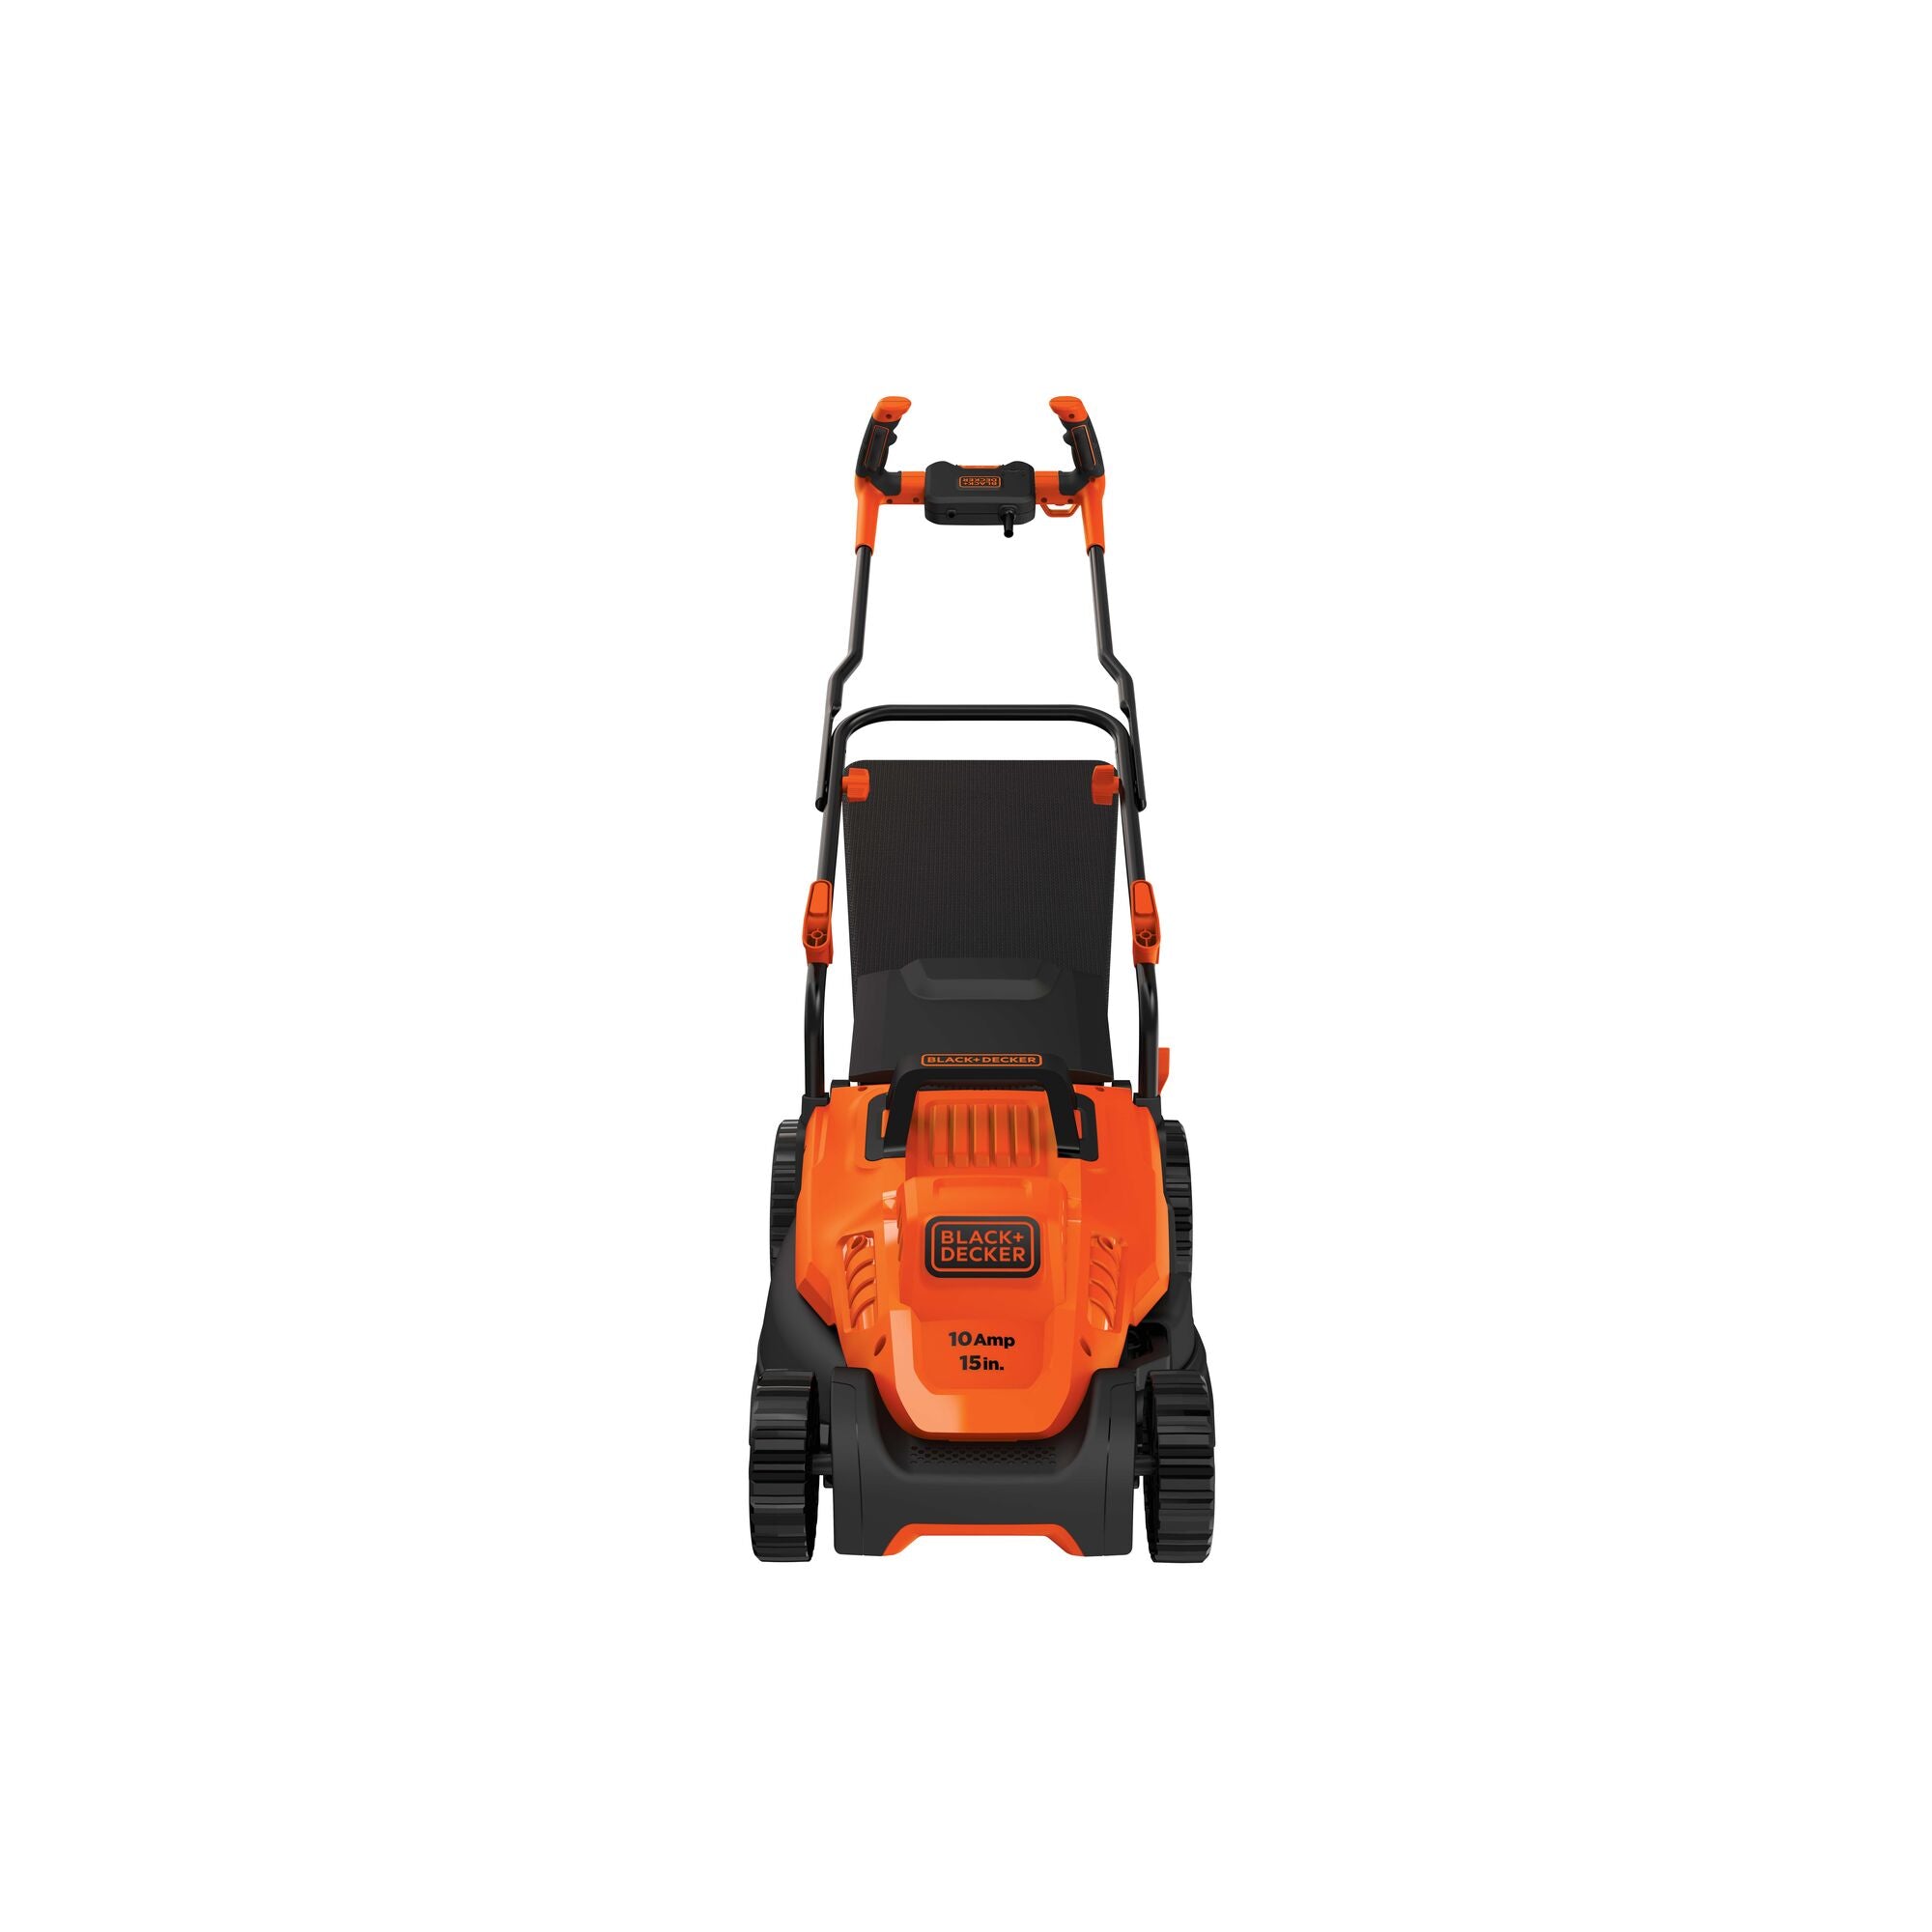 10 Amp 15 inch Electric Lawn Mower with Comfort Grip Handle being used for mowing grass.